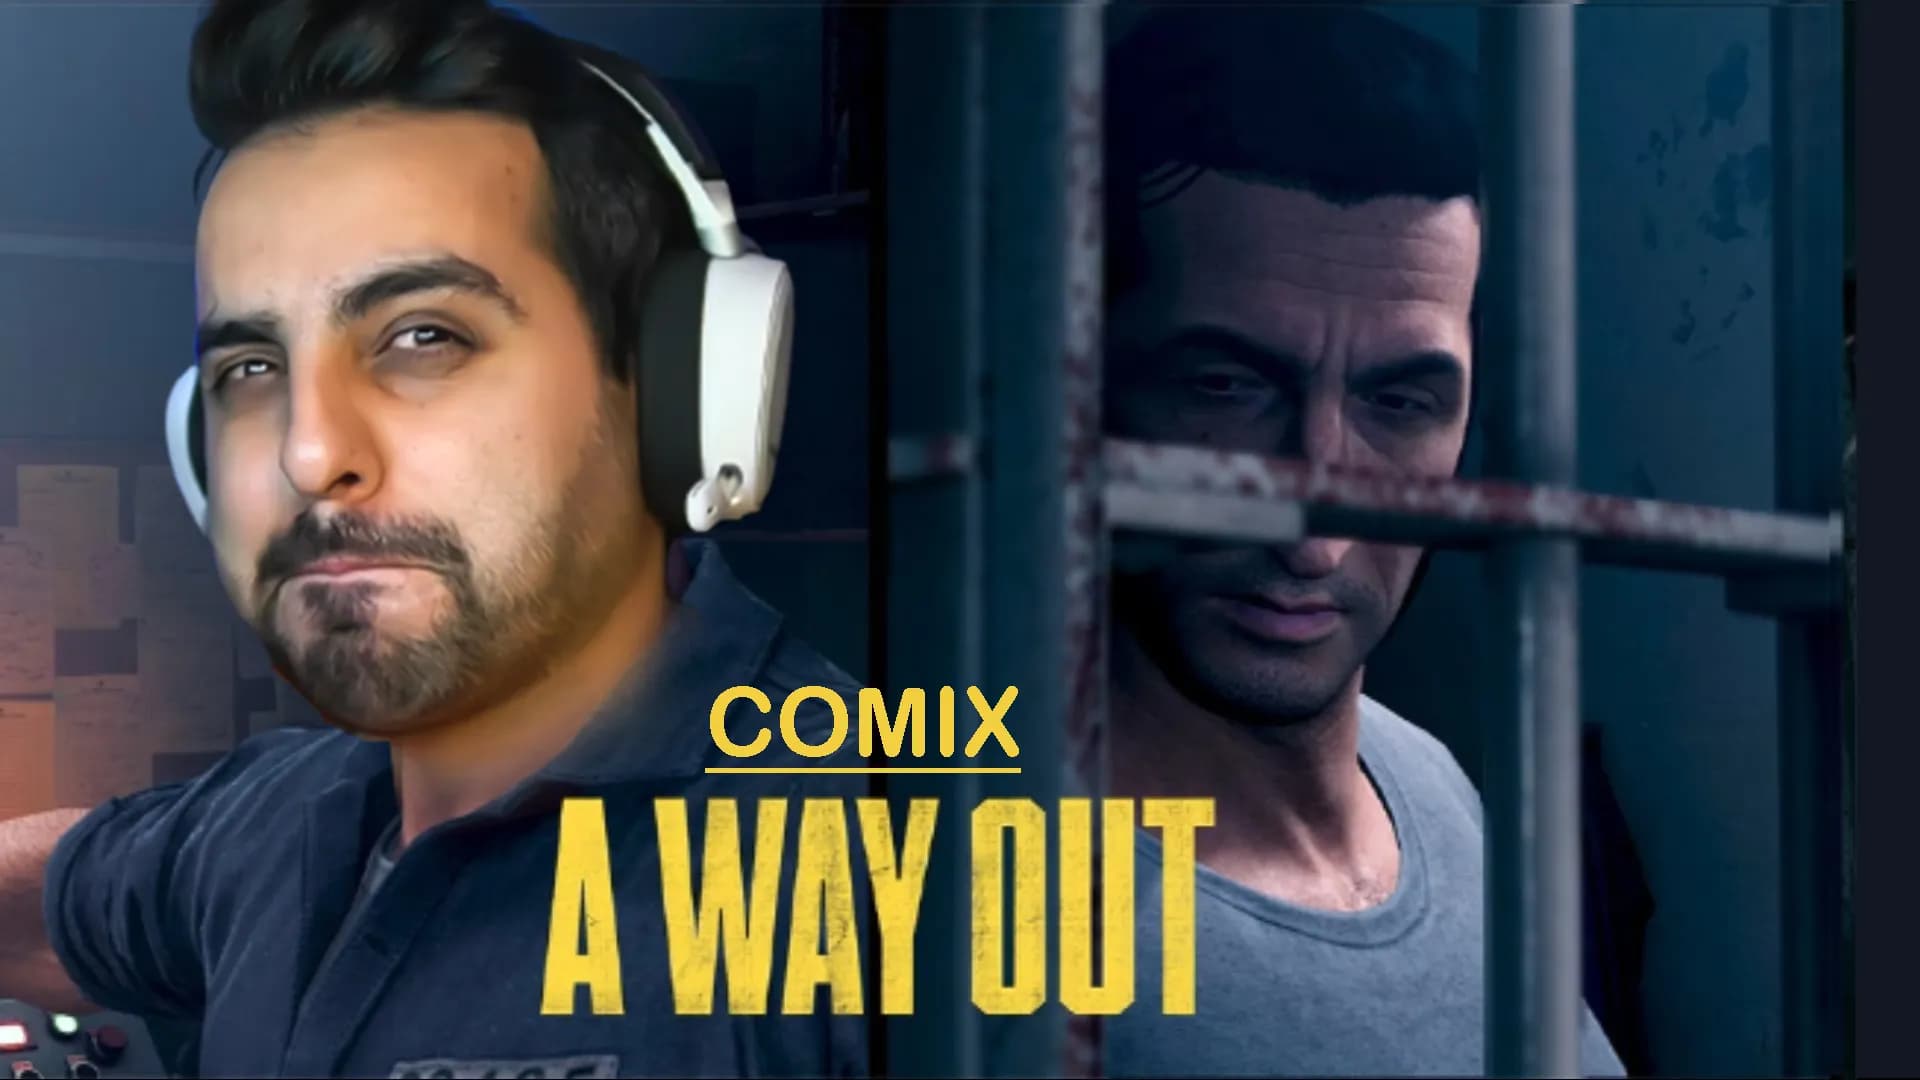 Away out / Alicomix